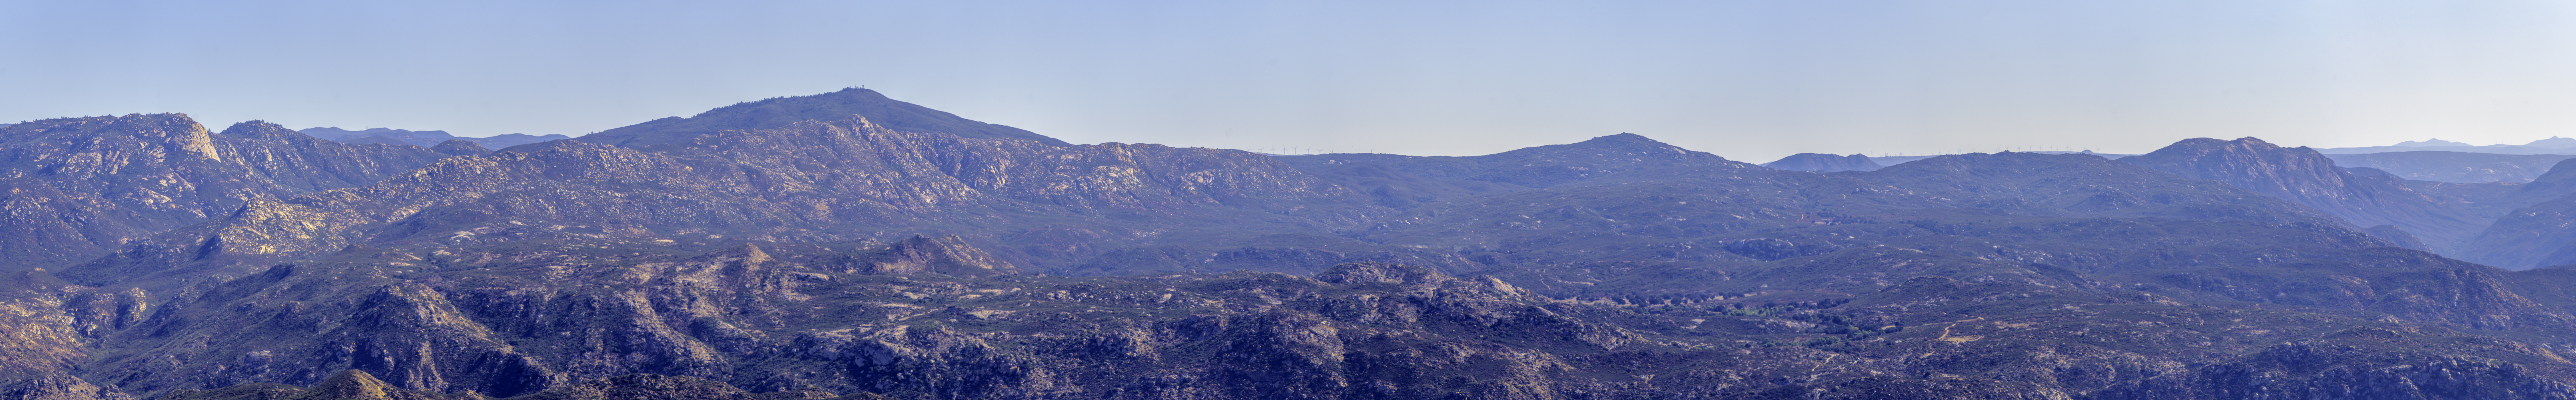 Looking towards Corte Madera and Plyes Peak towards the left, while Morena Butte is towards the far right. 